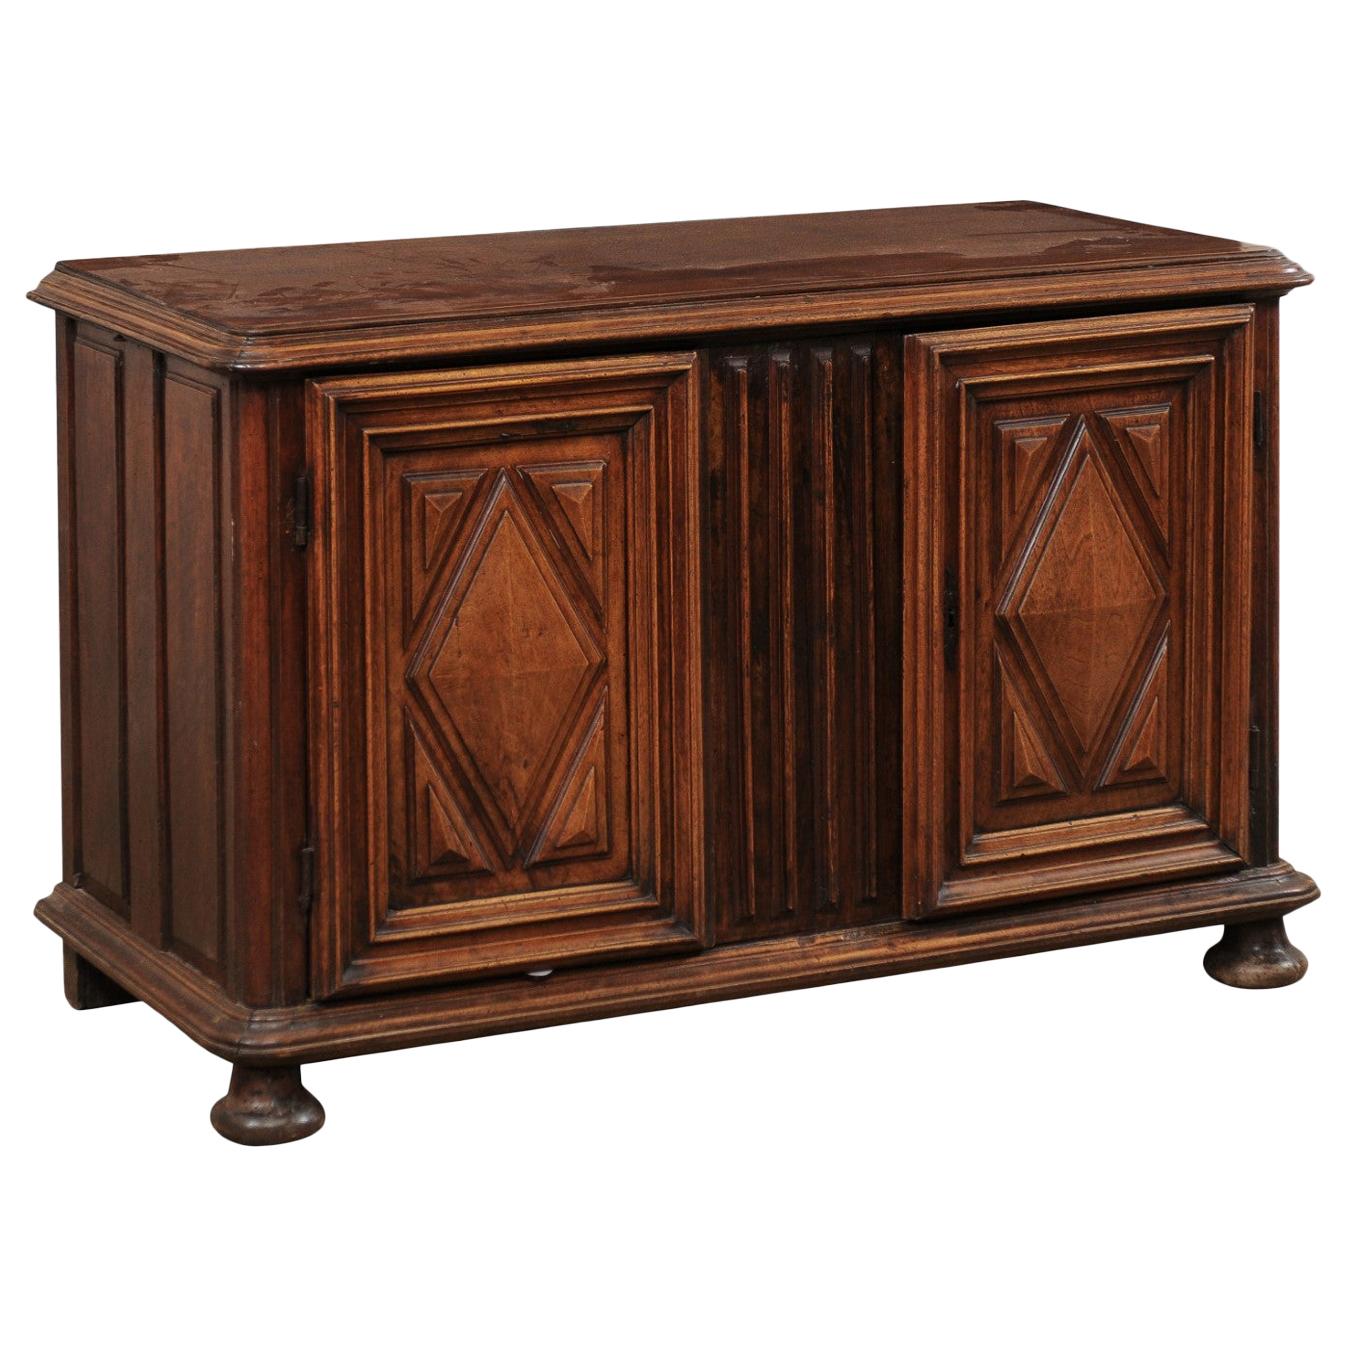 French Buffet Cabinet w/Thick Reed Carving & Diamond Paneled Doors, Early 19th C